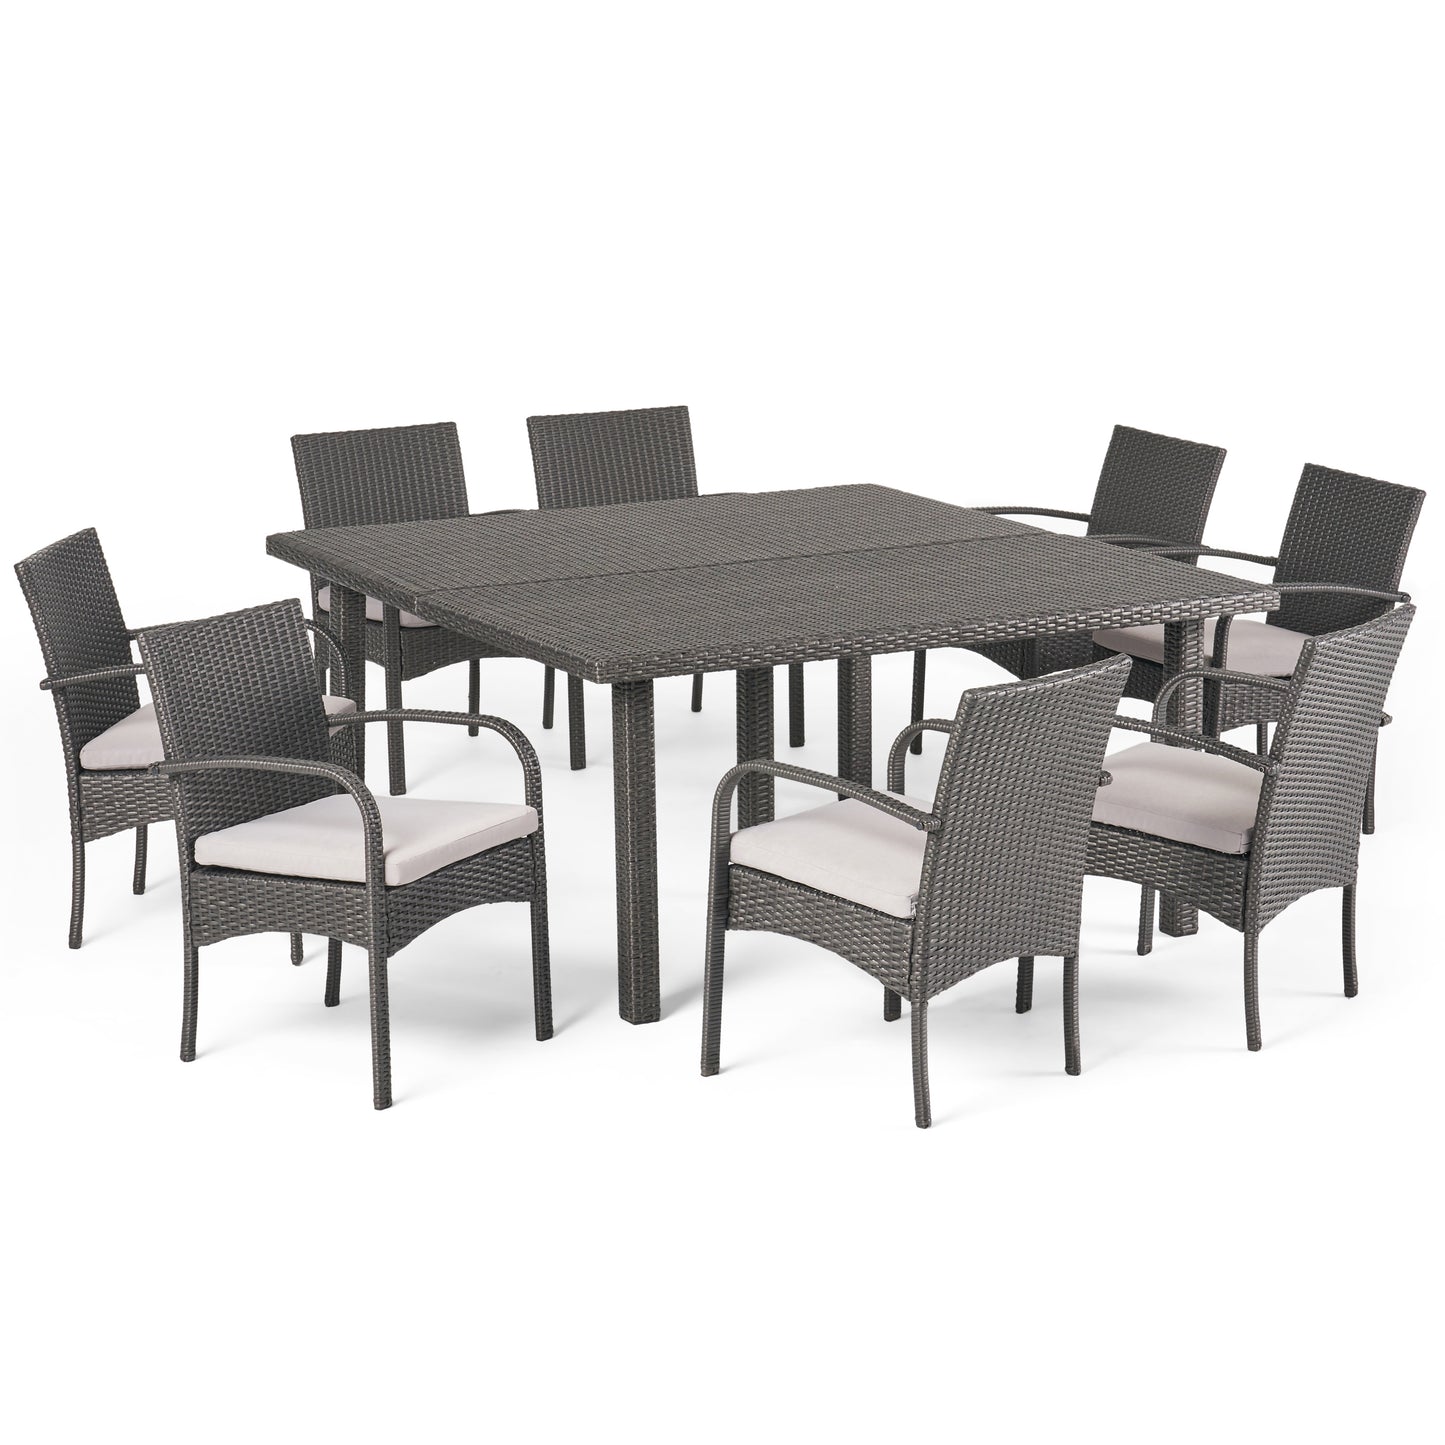 Coral Outdoor 9 Piece Wicker Dining Set with Water Resistant Cushions